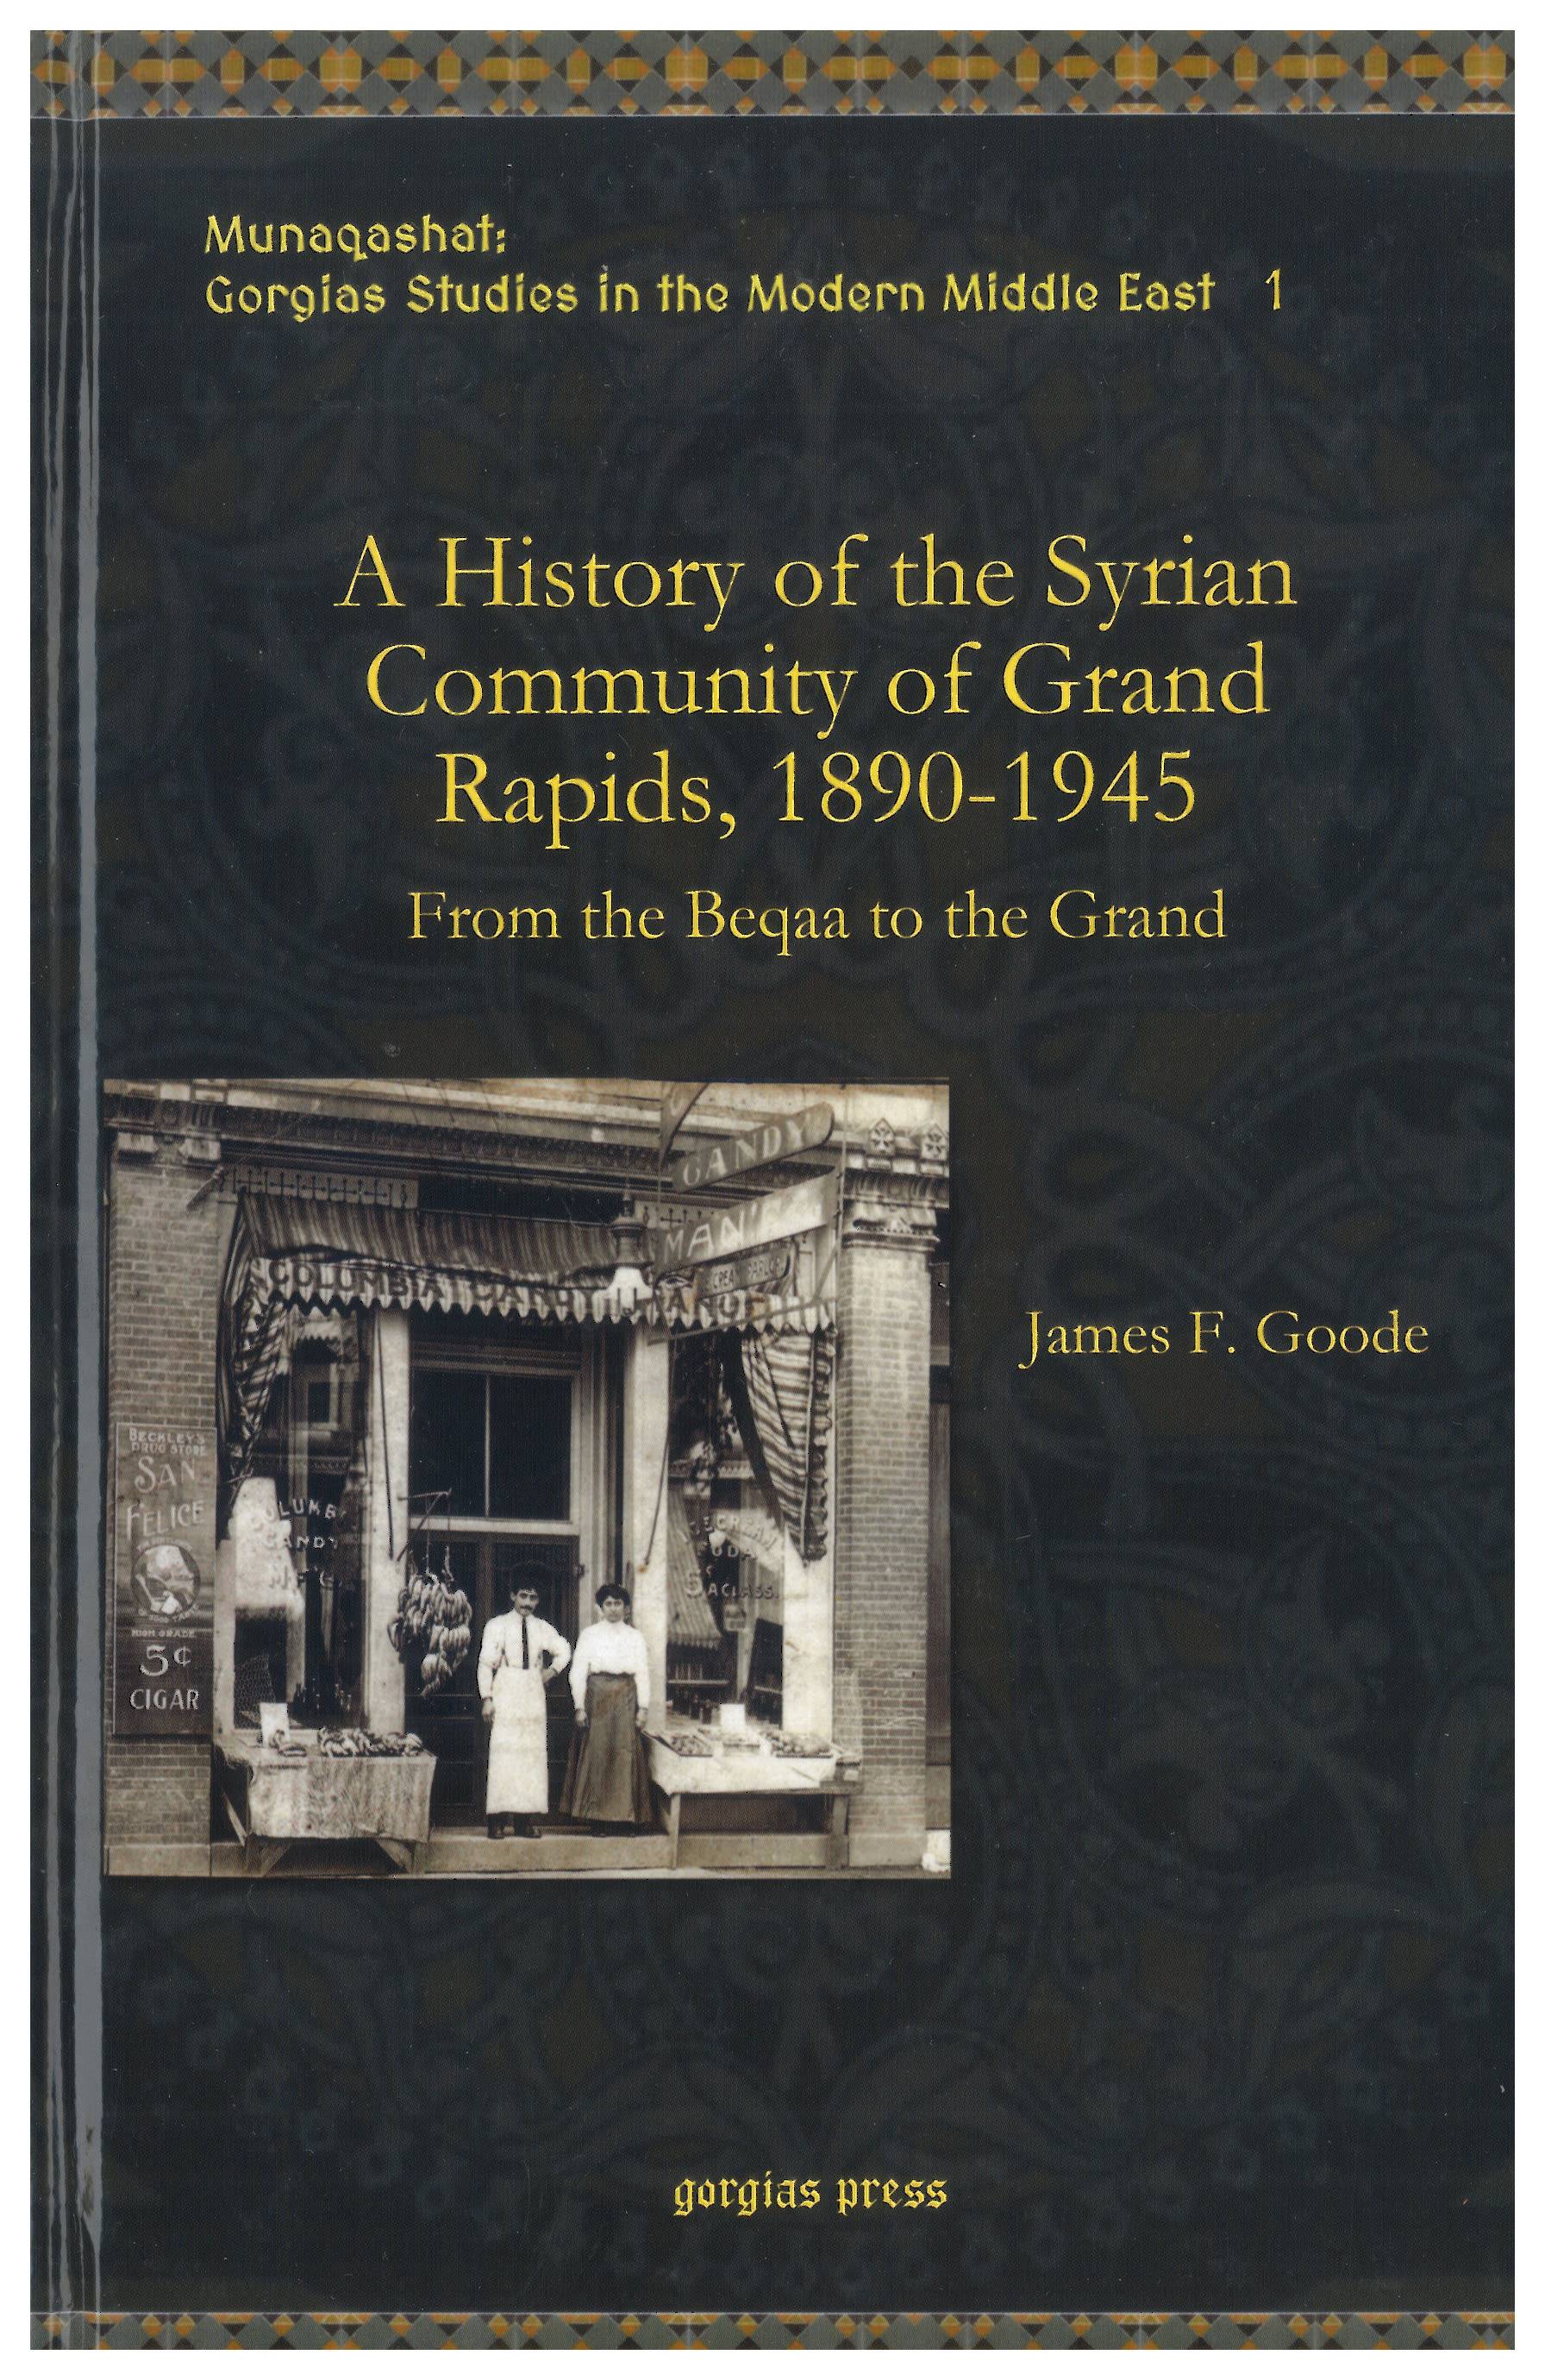 A History of the Syrian Community of Grand Rapids